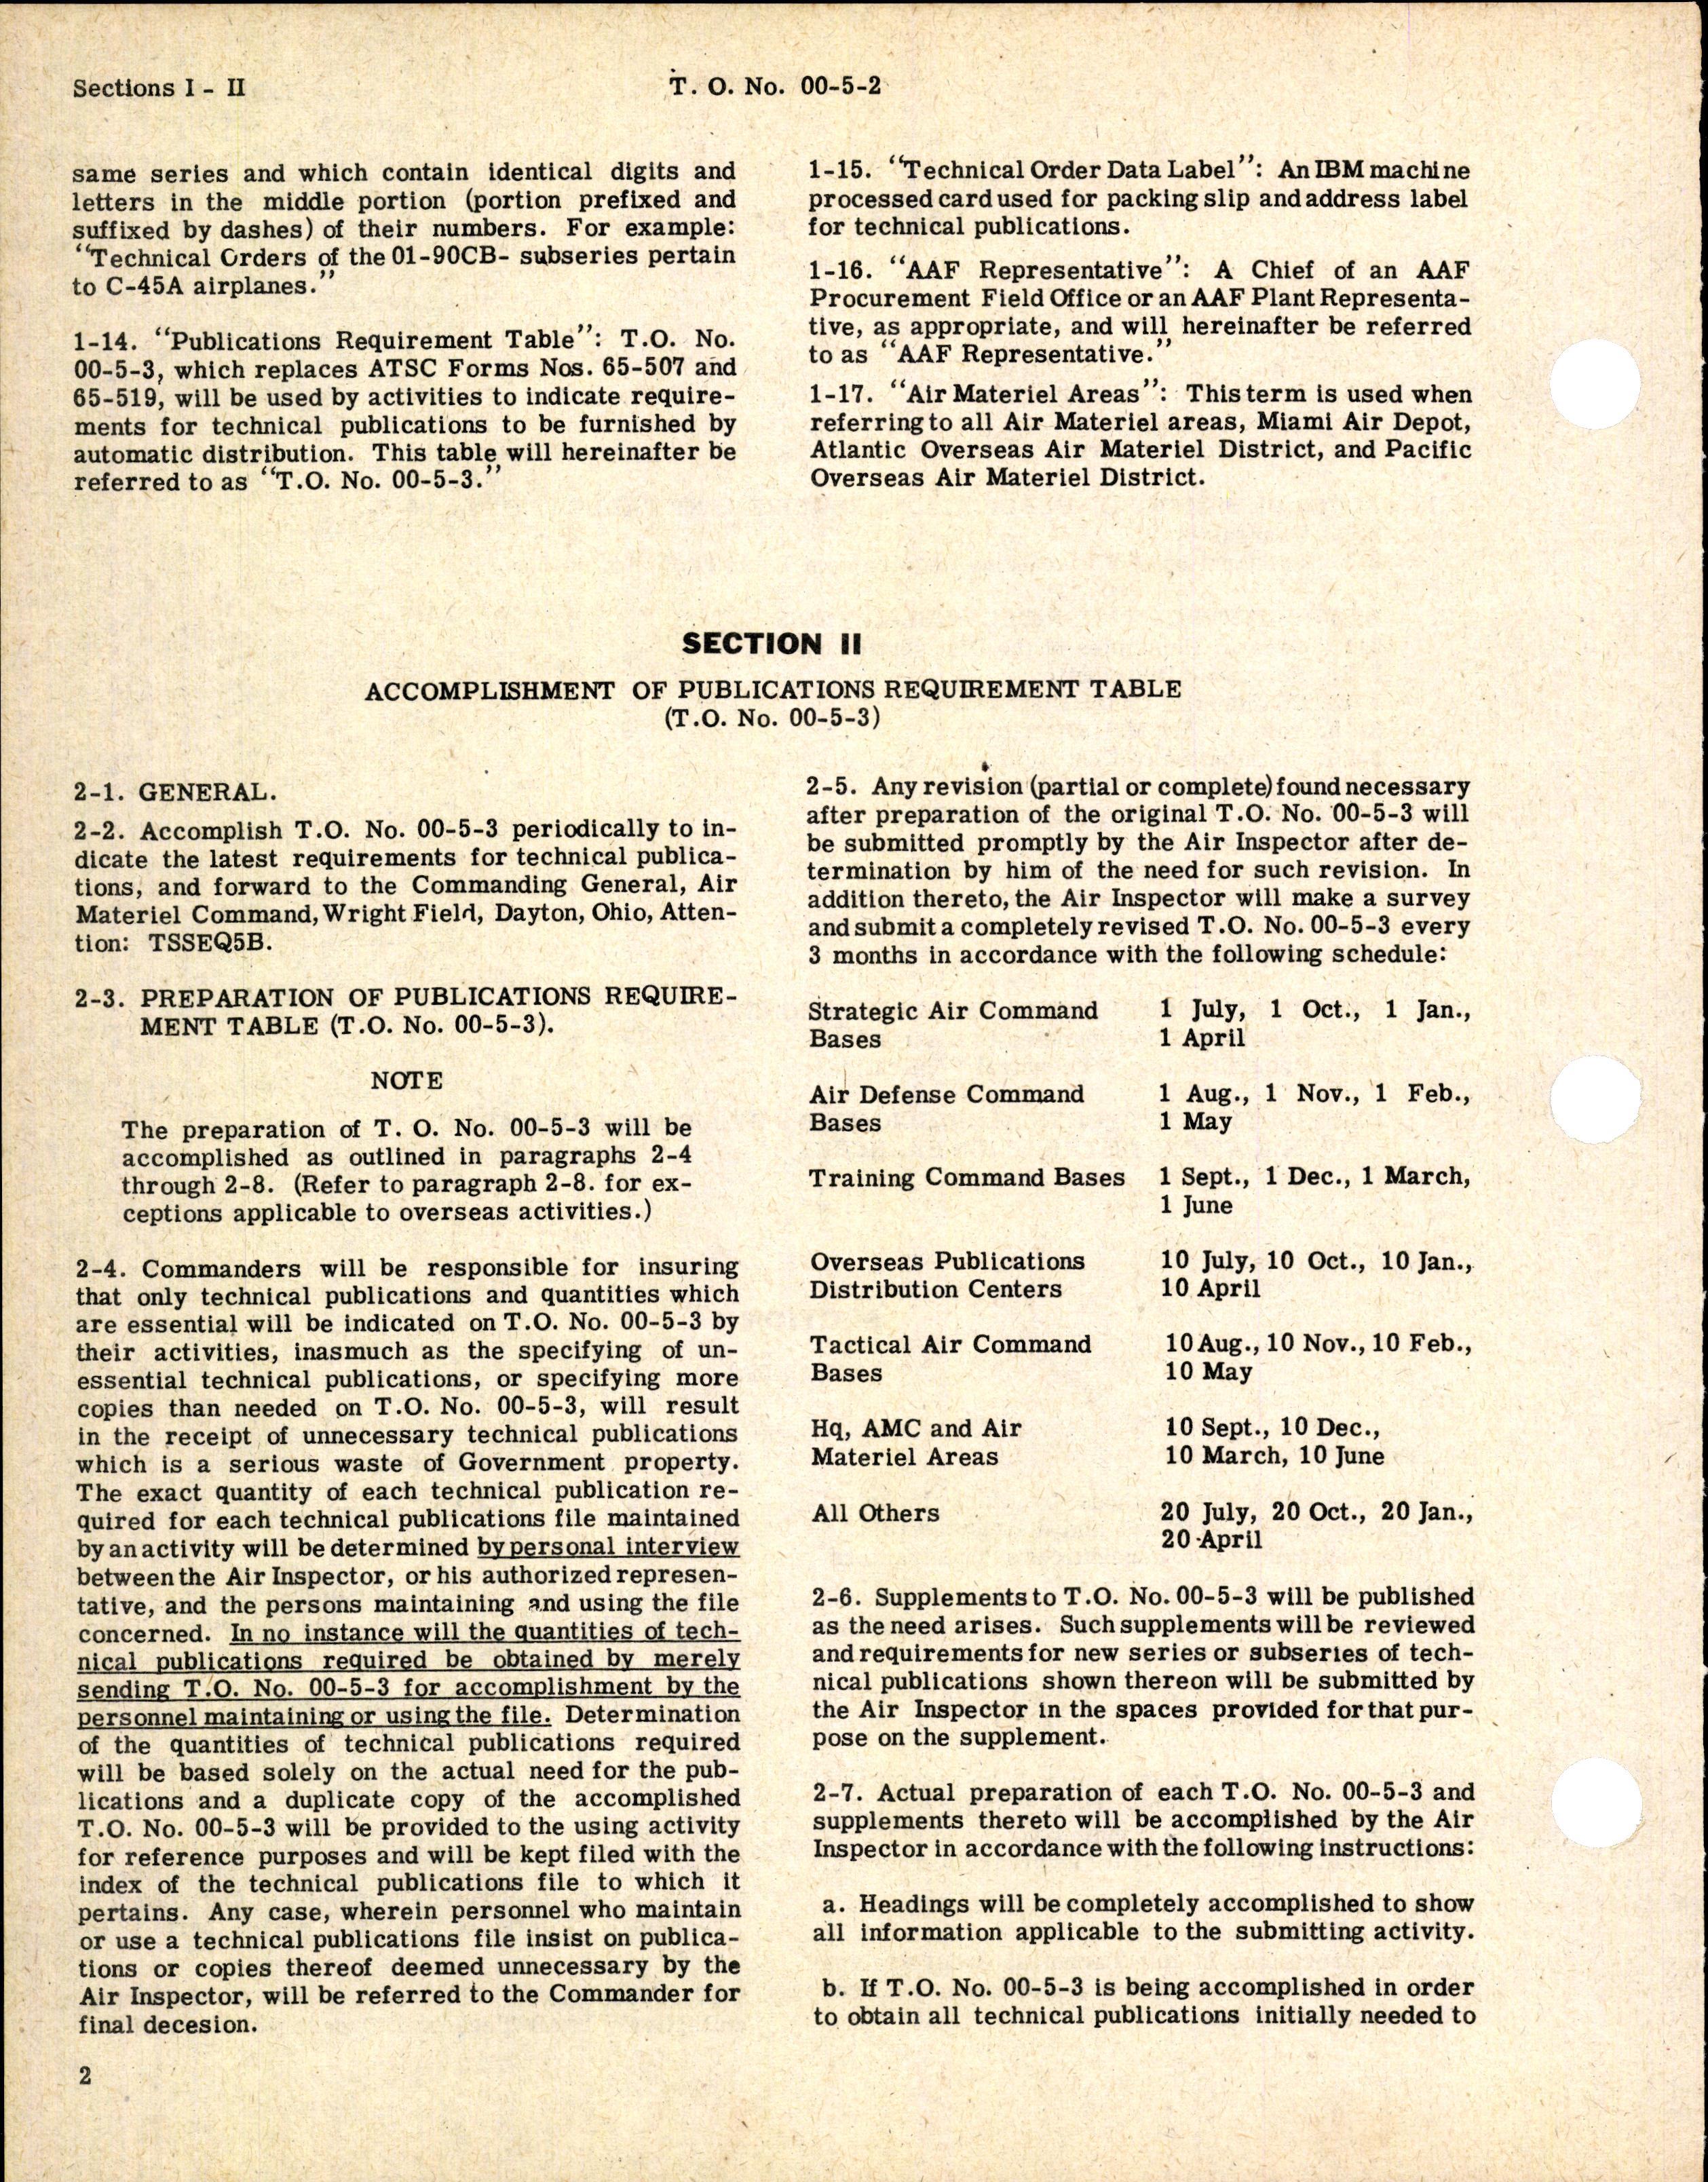 Sample page 4 from AirCorps Library document: Distribution of Technical Publications